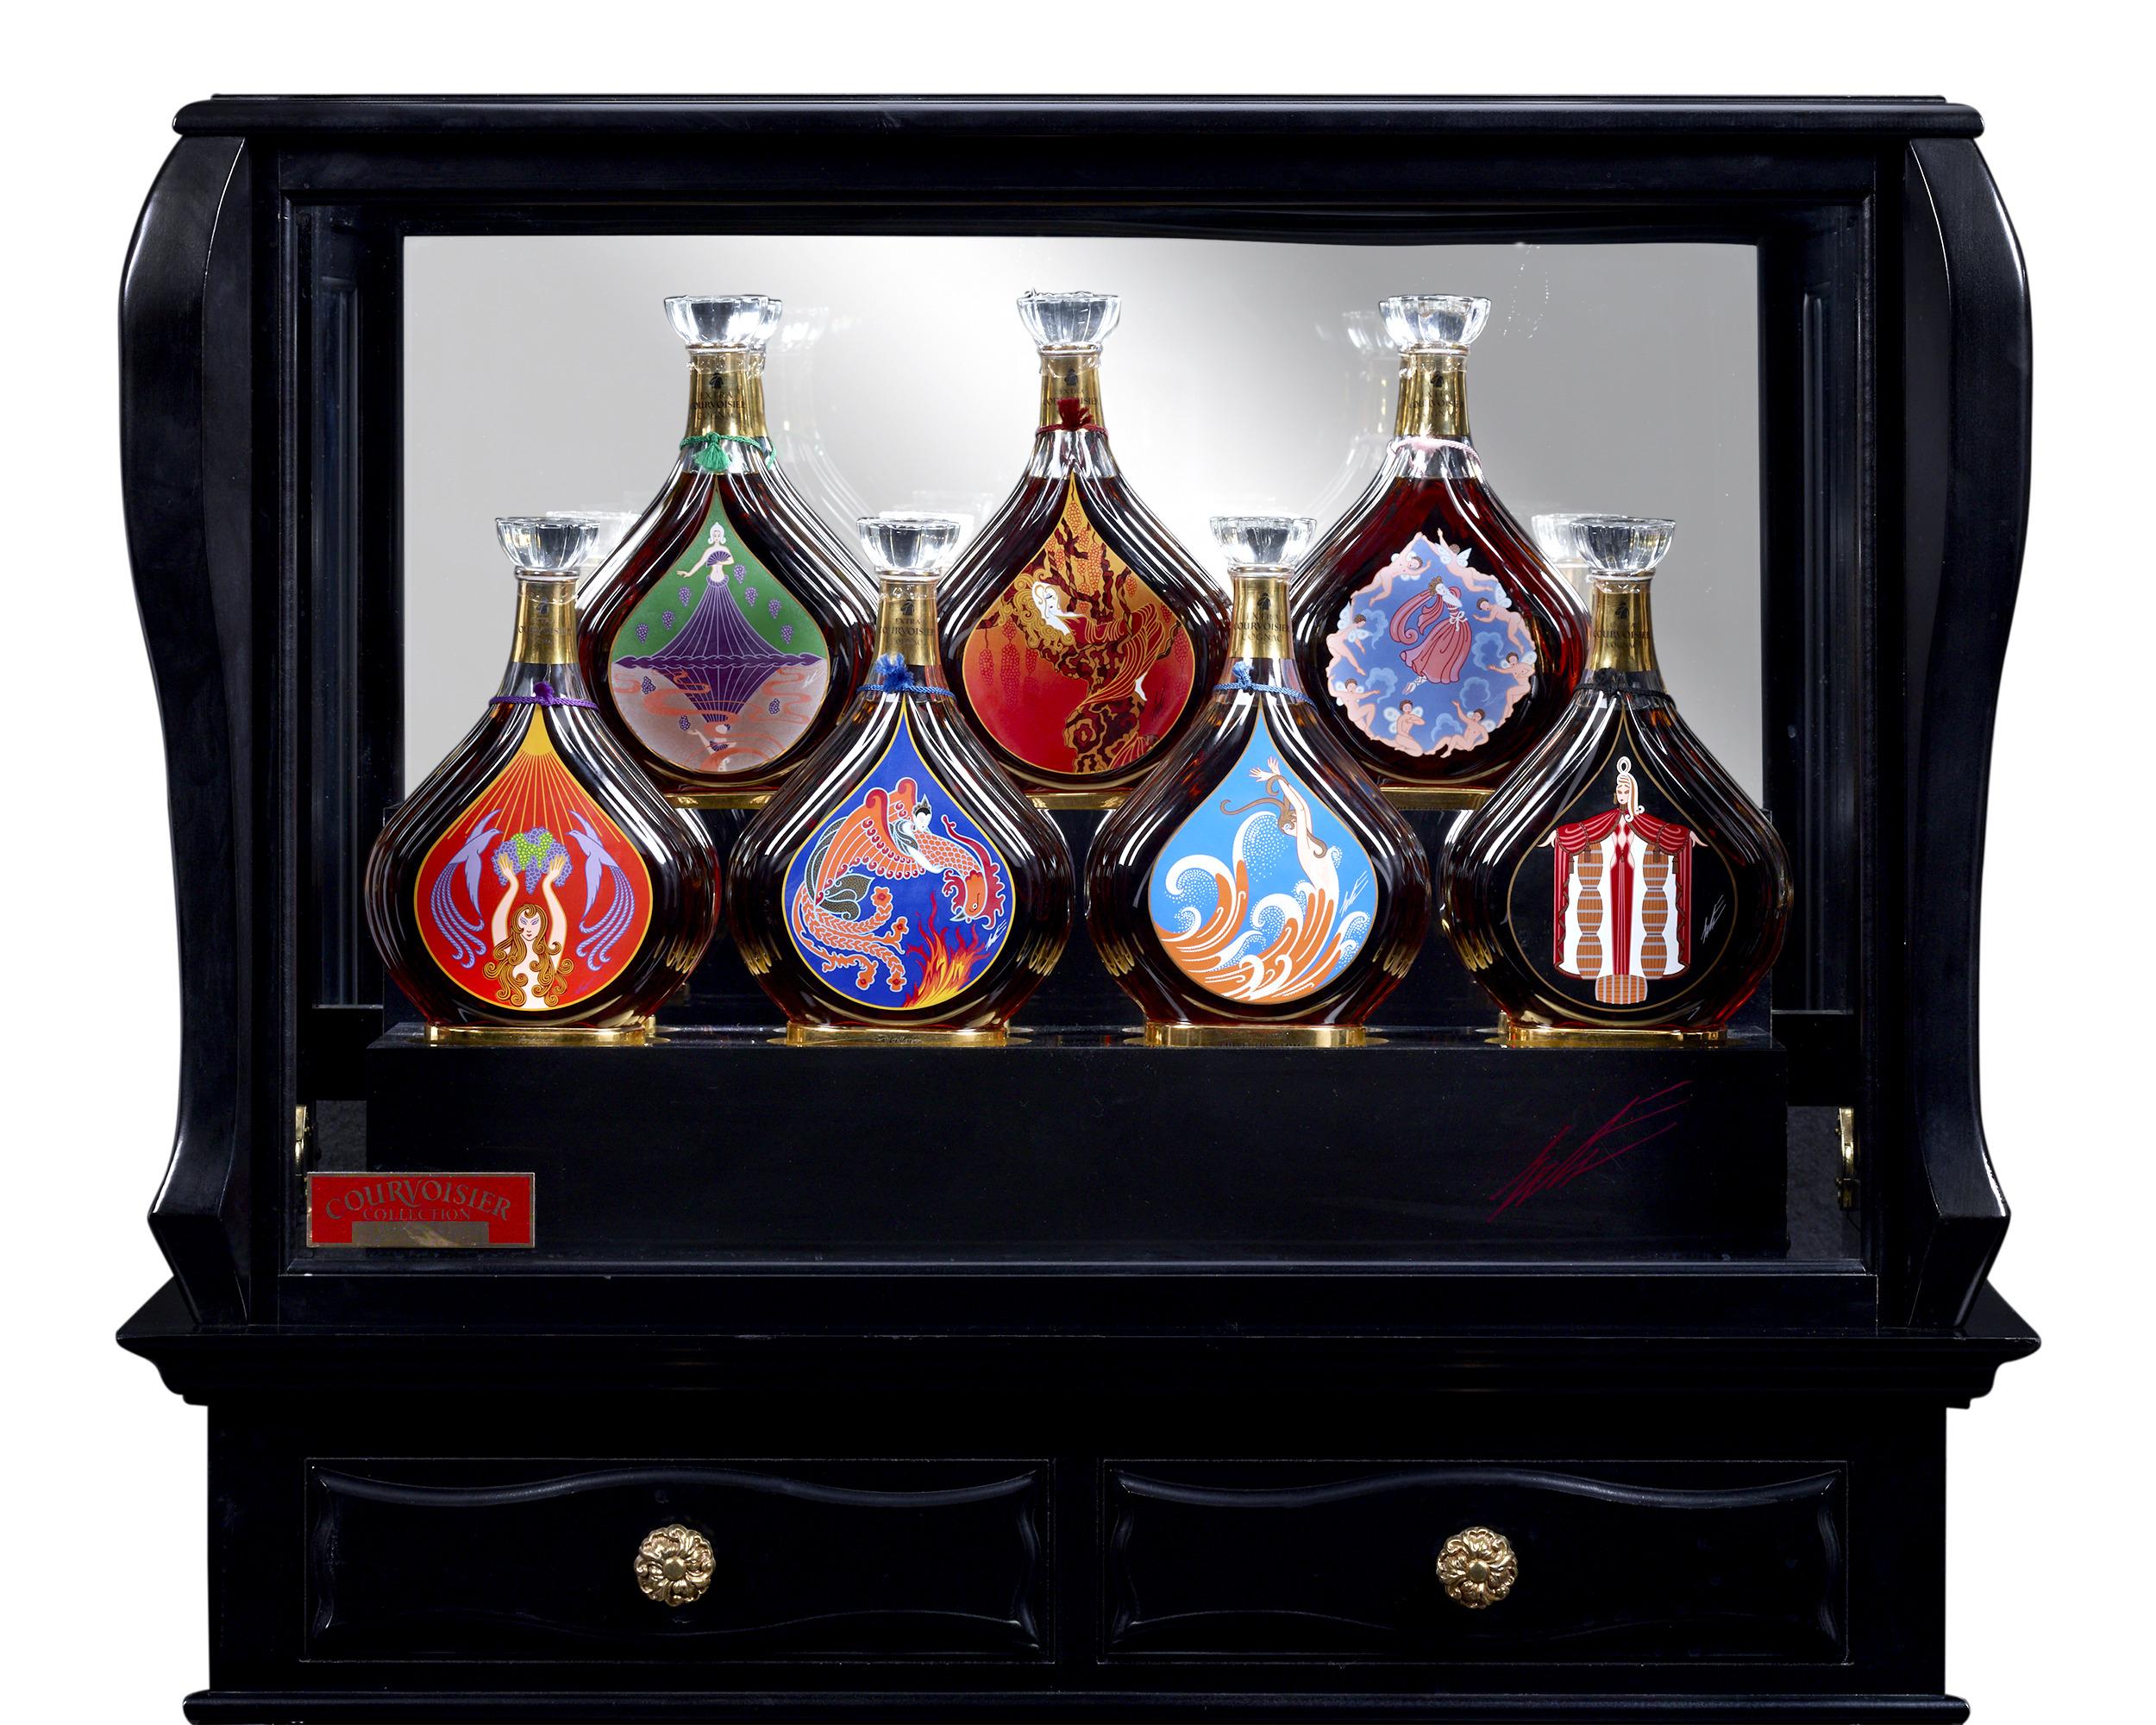 The Erté Courvoisier Cognac collection was created by one of the great masters of Art Deco and fashion illustration, Erté (aka Romain de Tirtoff), in collaboration with one of the most iconic names in fine liqueur, Courvoisier. The bottle shape was